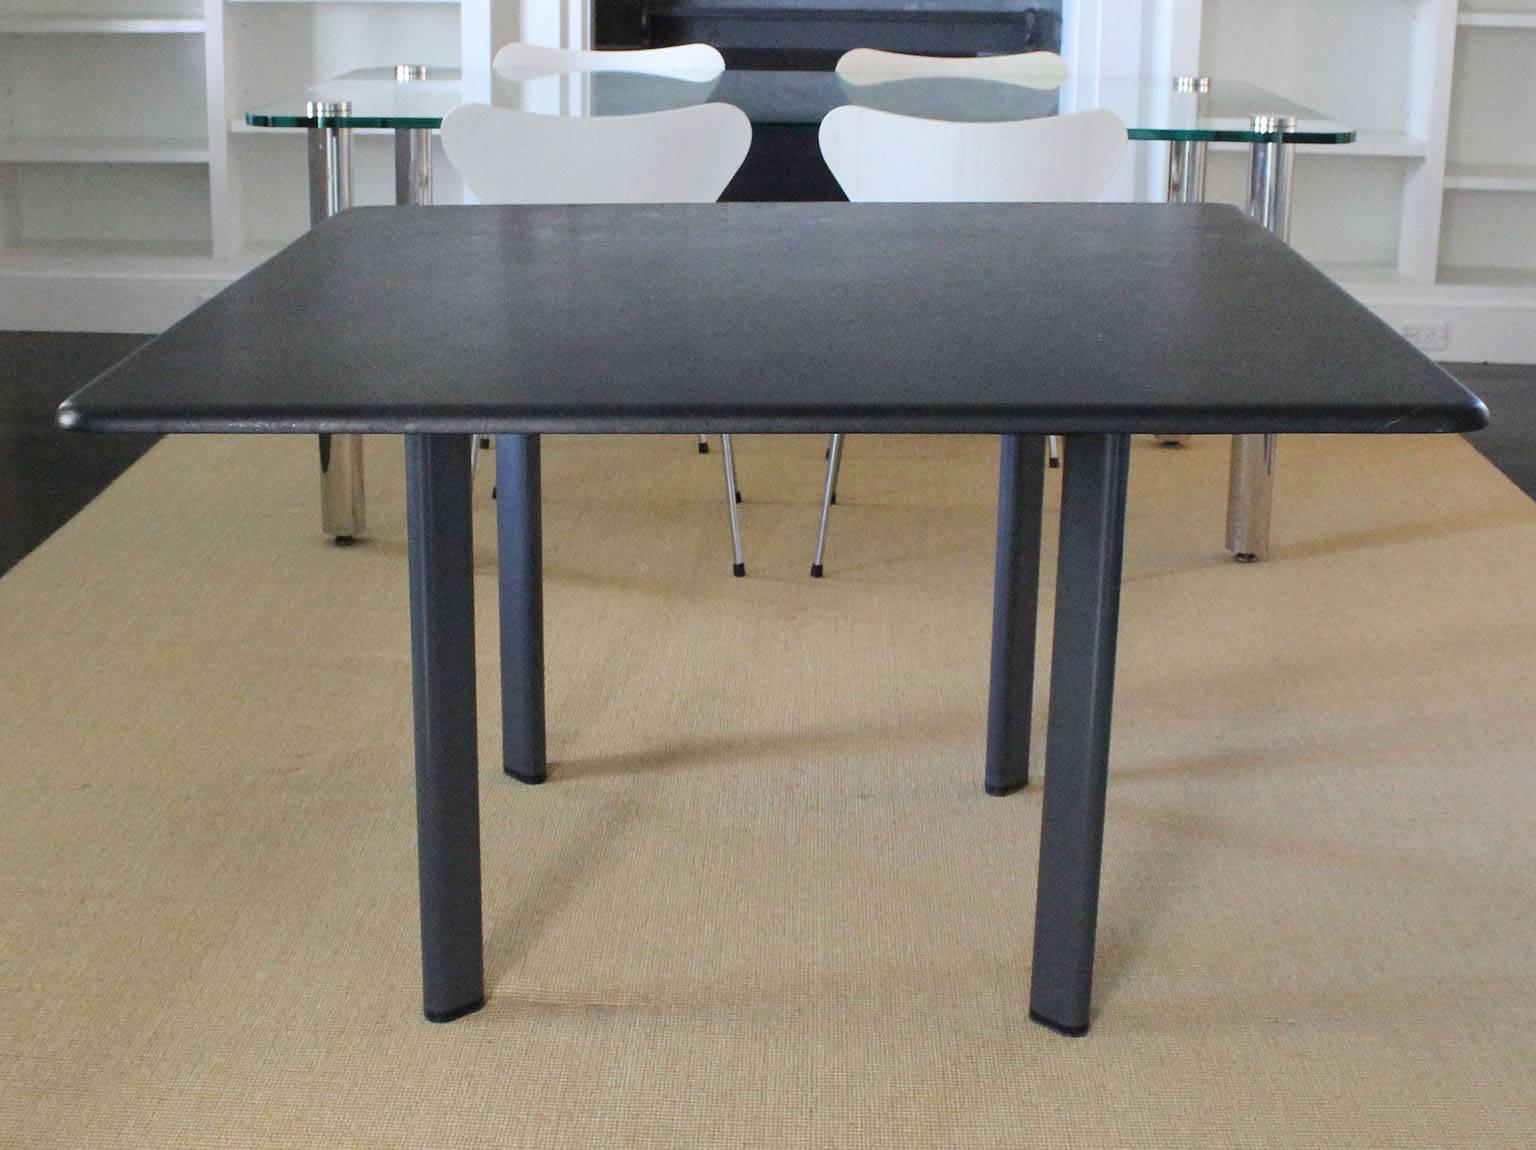 A granite top table with enameled metal legs designed by Joe D'Urso for Knoll.

complementary shipping within 30 miles.